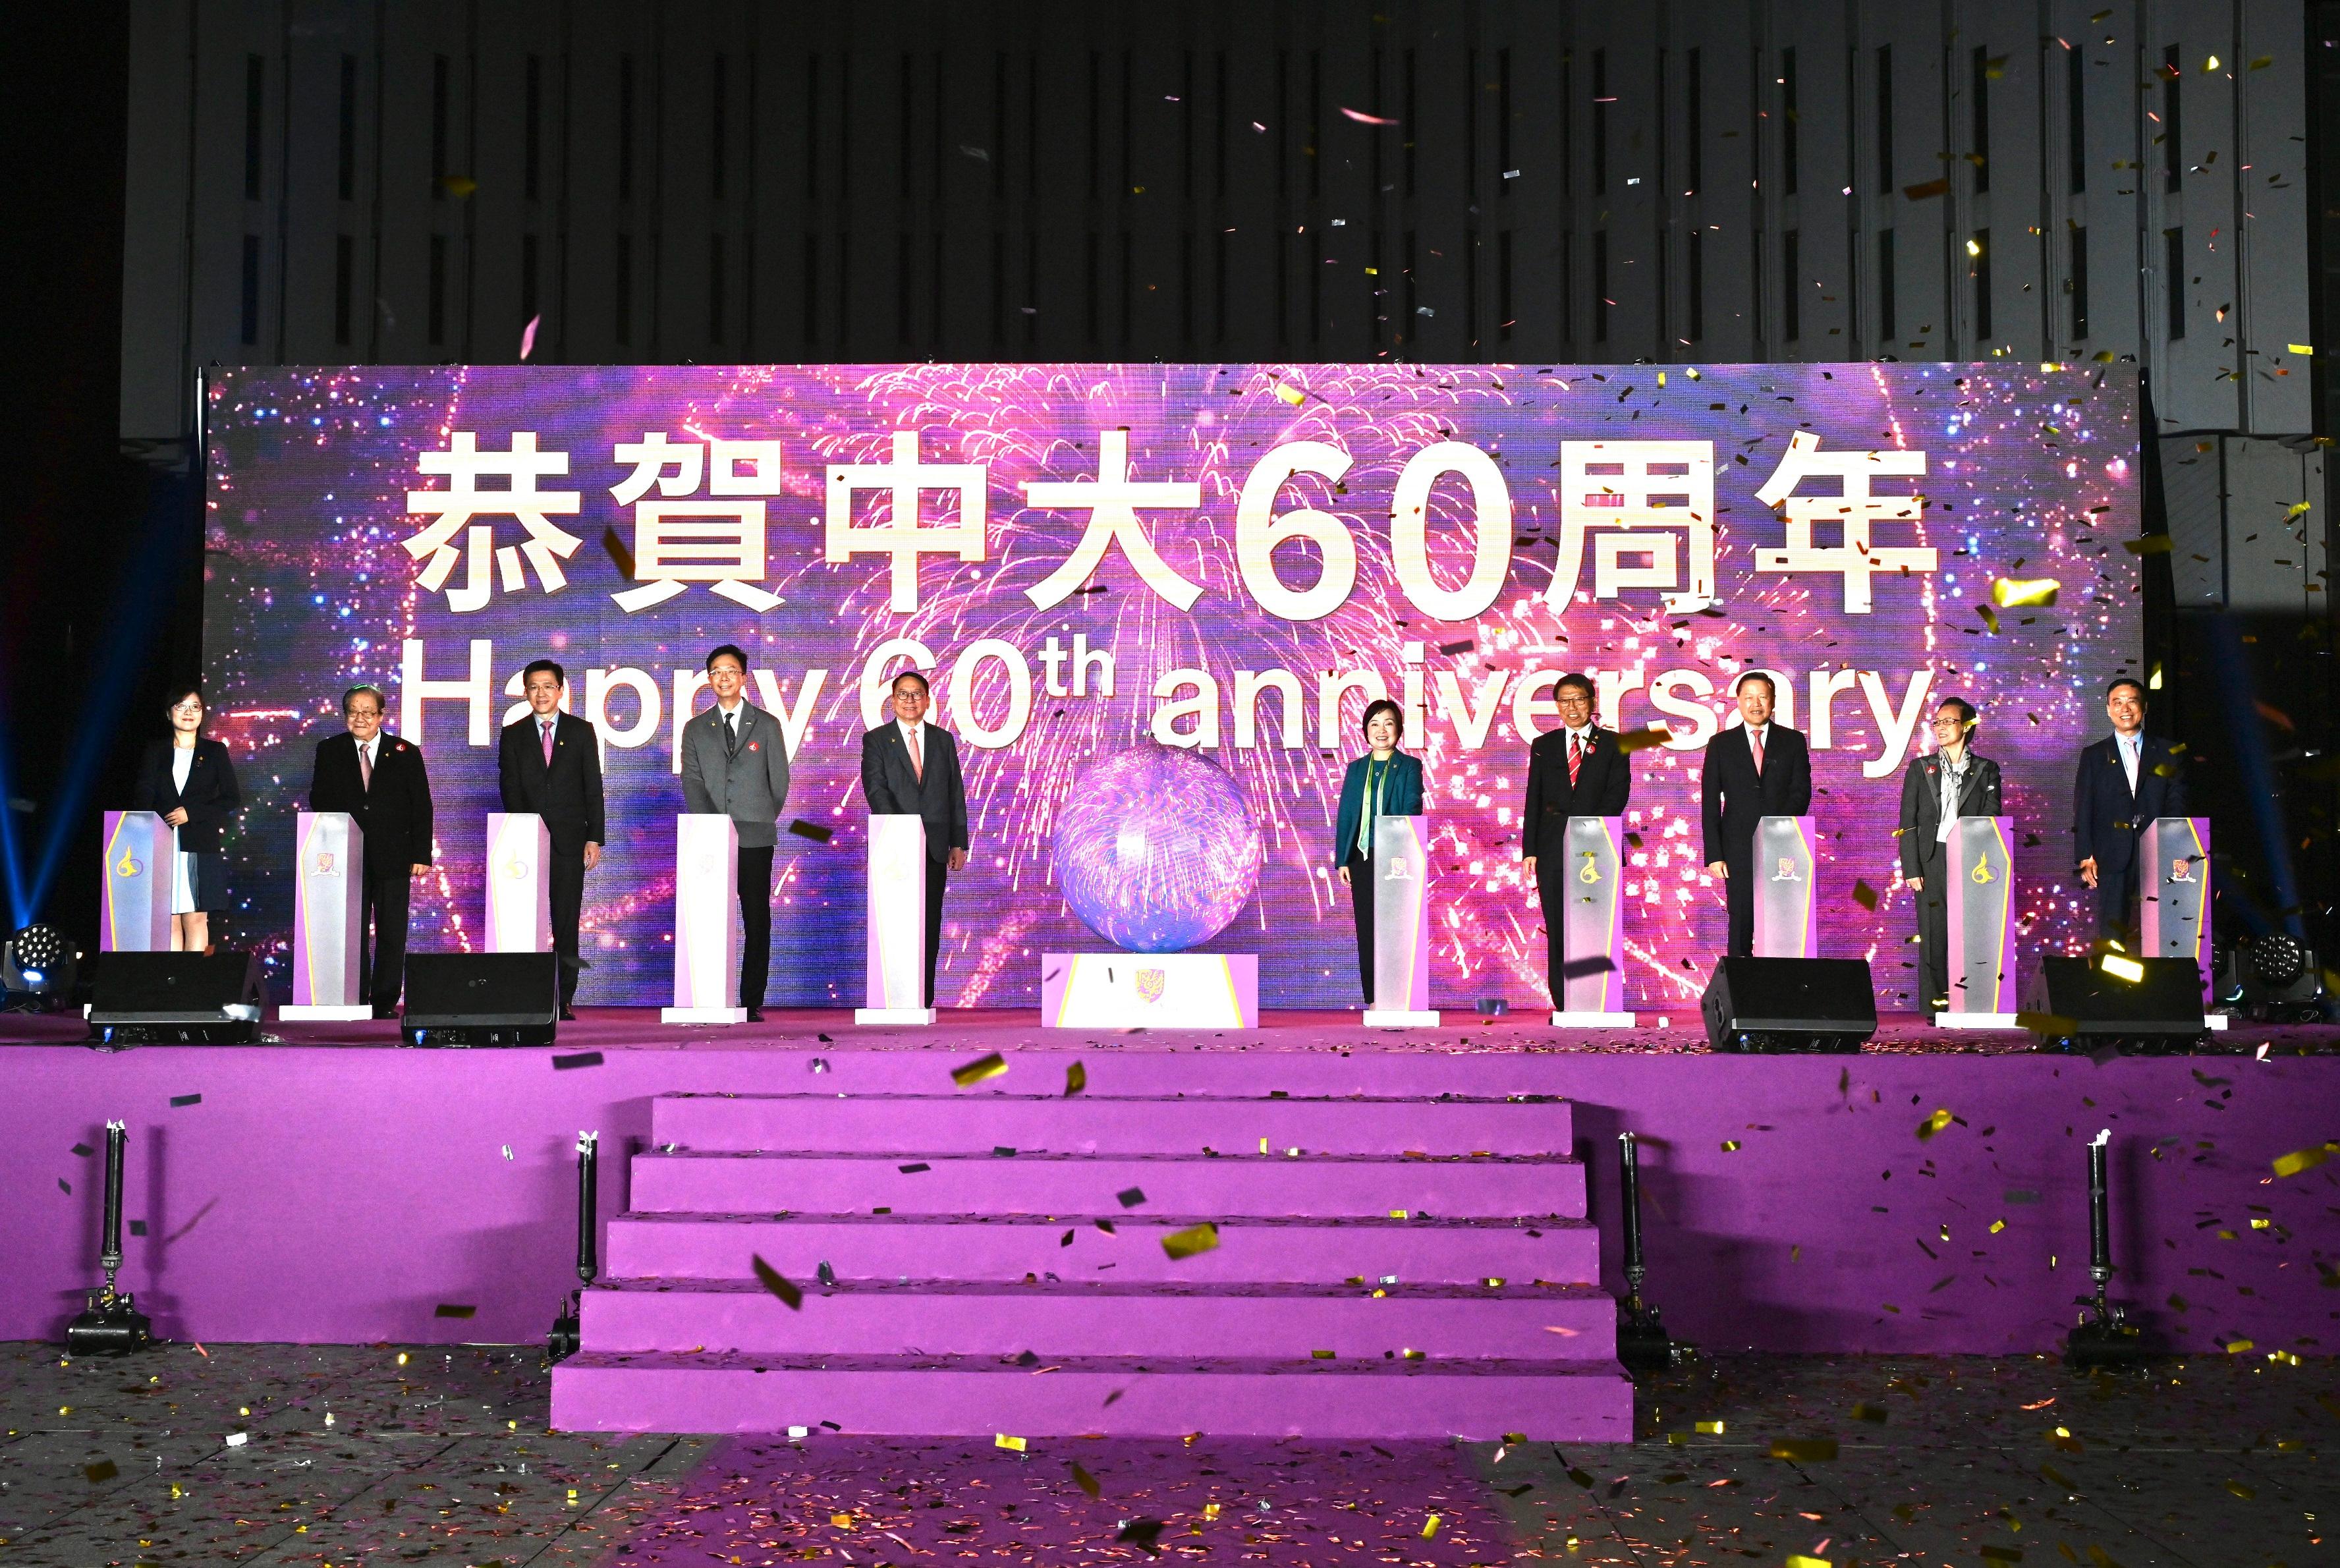 The Chief Secretary for Administration, Mr Chan Kwok-ki, attends the Chinese University of Hong Kong (CUHK) 60th Anniversary Commencement Ceremony today (February 12). Photo shows Mr Chan (fifth left); the Council Chairman of the CUHK, Professor John Chai (fourth left); the Vice-Chancellor and President of the CUHK, Professor Rocky Tuan (fourth right); the Secretary for Education, Dr Choi Yuk-lin (fifth right); the Secretary for Innovation, Technology and Industry, Professor Sun Dong (third left); and the Chairperson of the CUHK 60th Anniversary Celebration Steering Committee, Ms Lina Yan (second right), officiating at the Anniversary Commencement Ceremony.